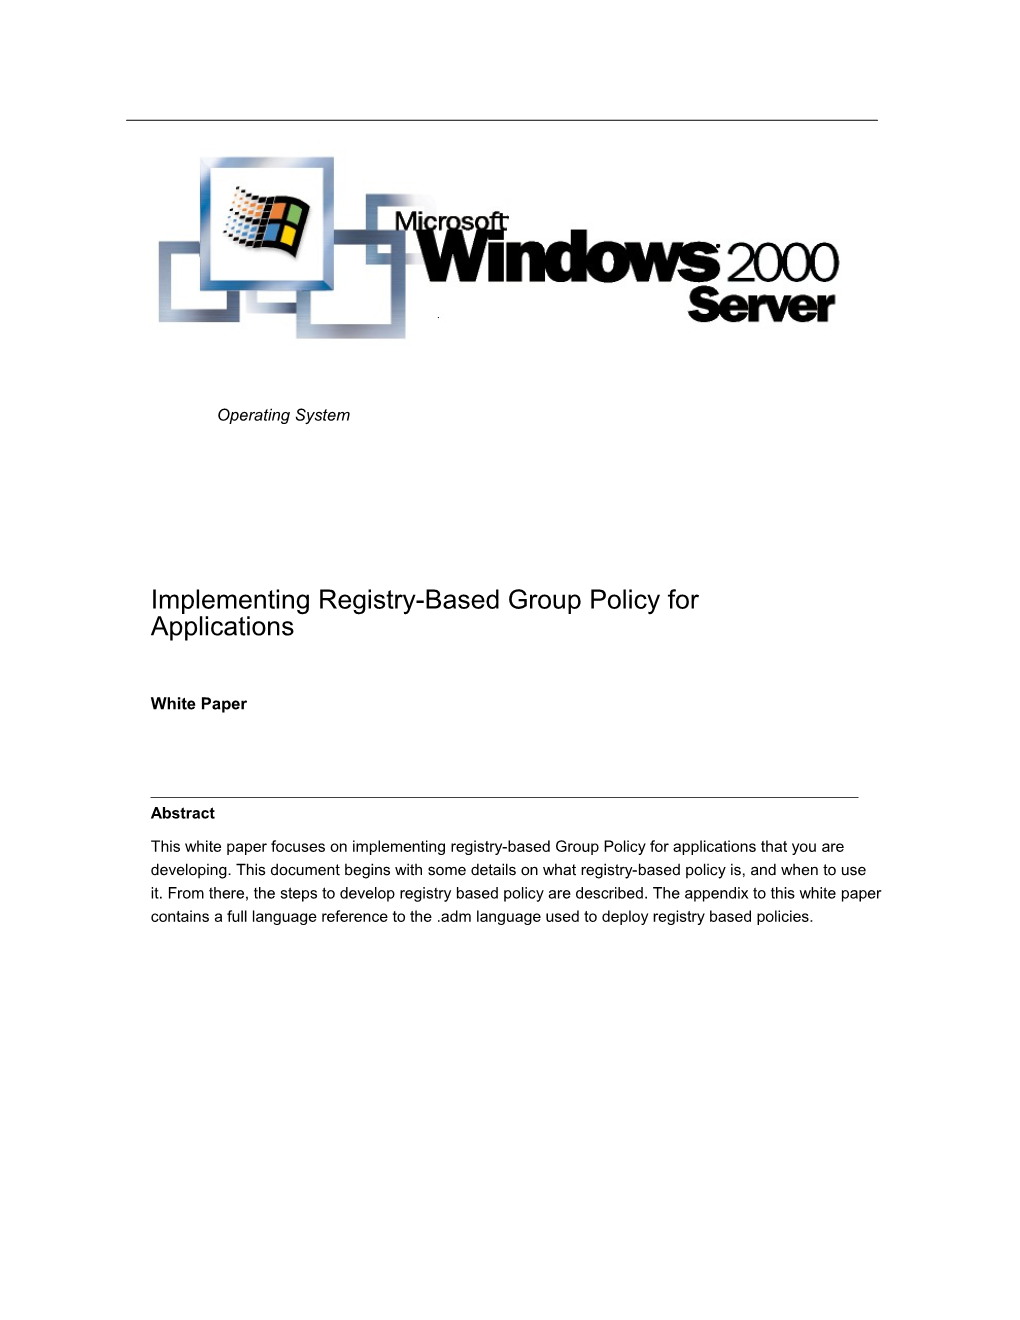 Implementing Registry-Based Group Policy for Applications